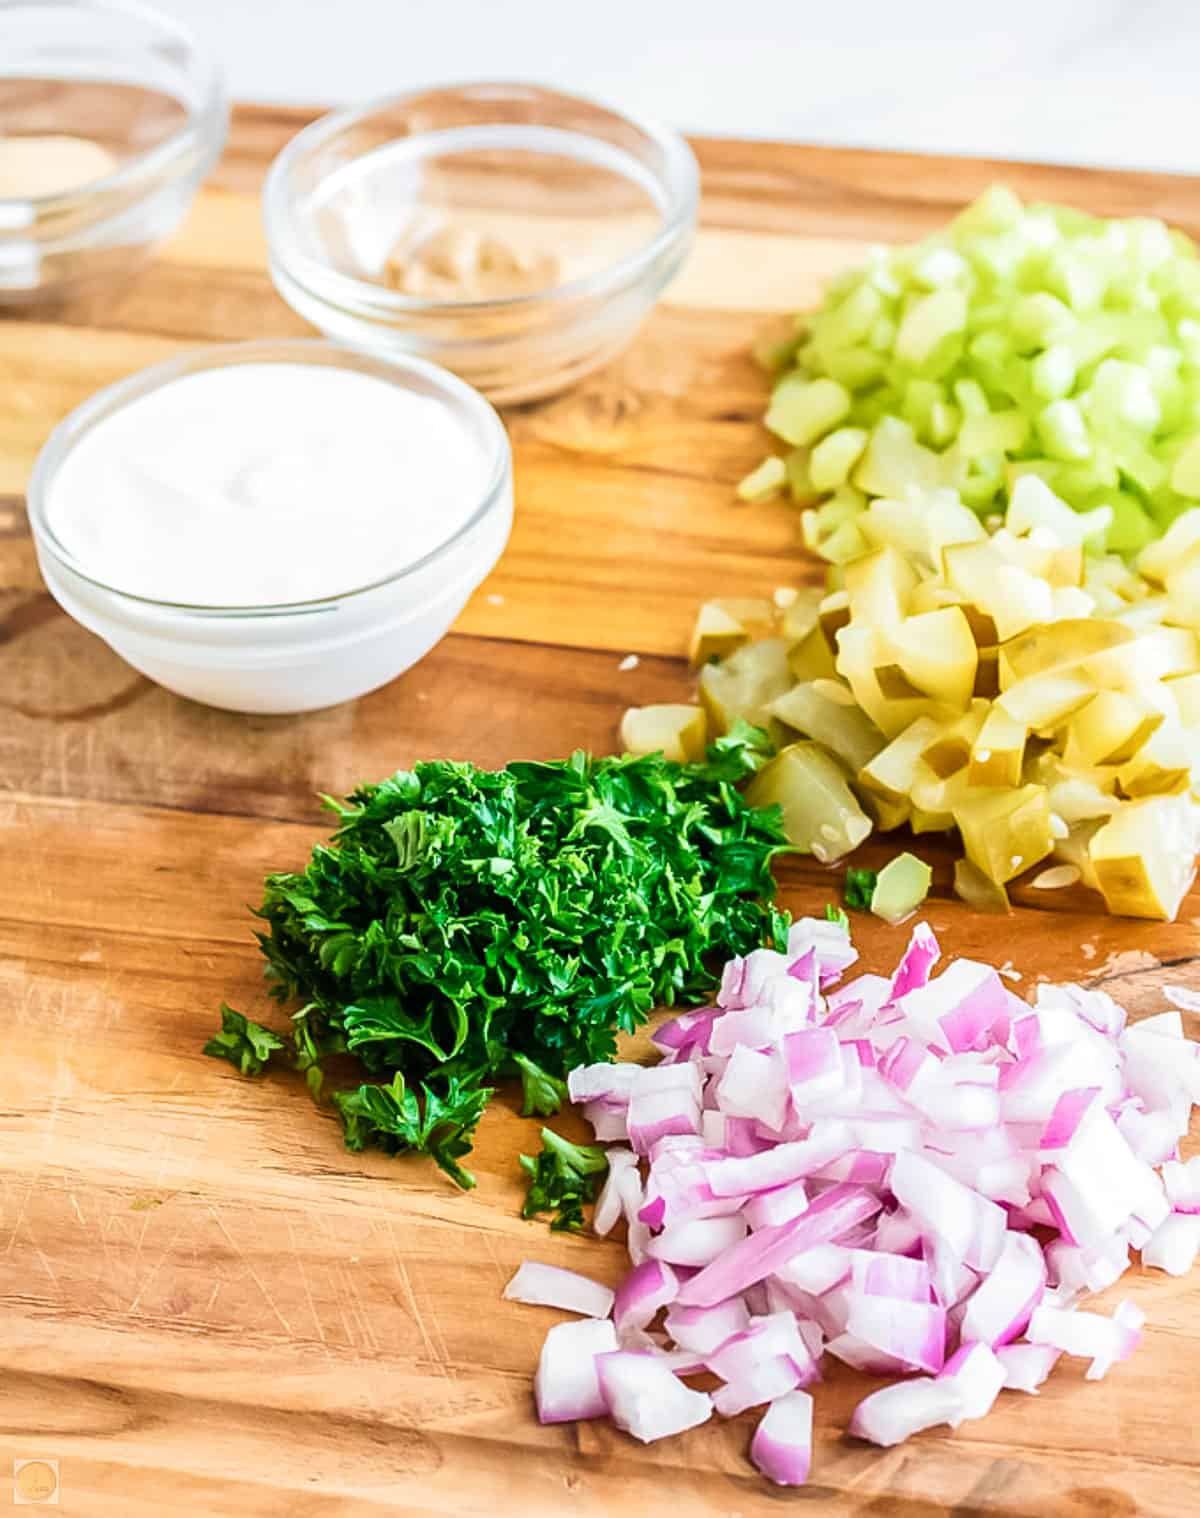 chopped ingredients on a board